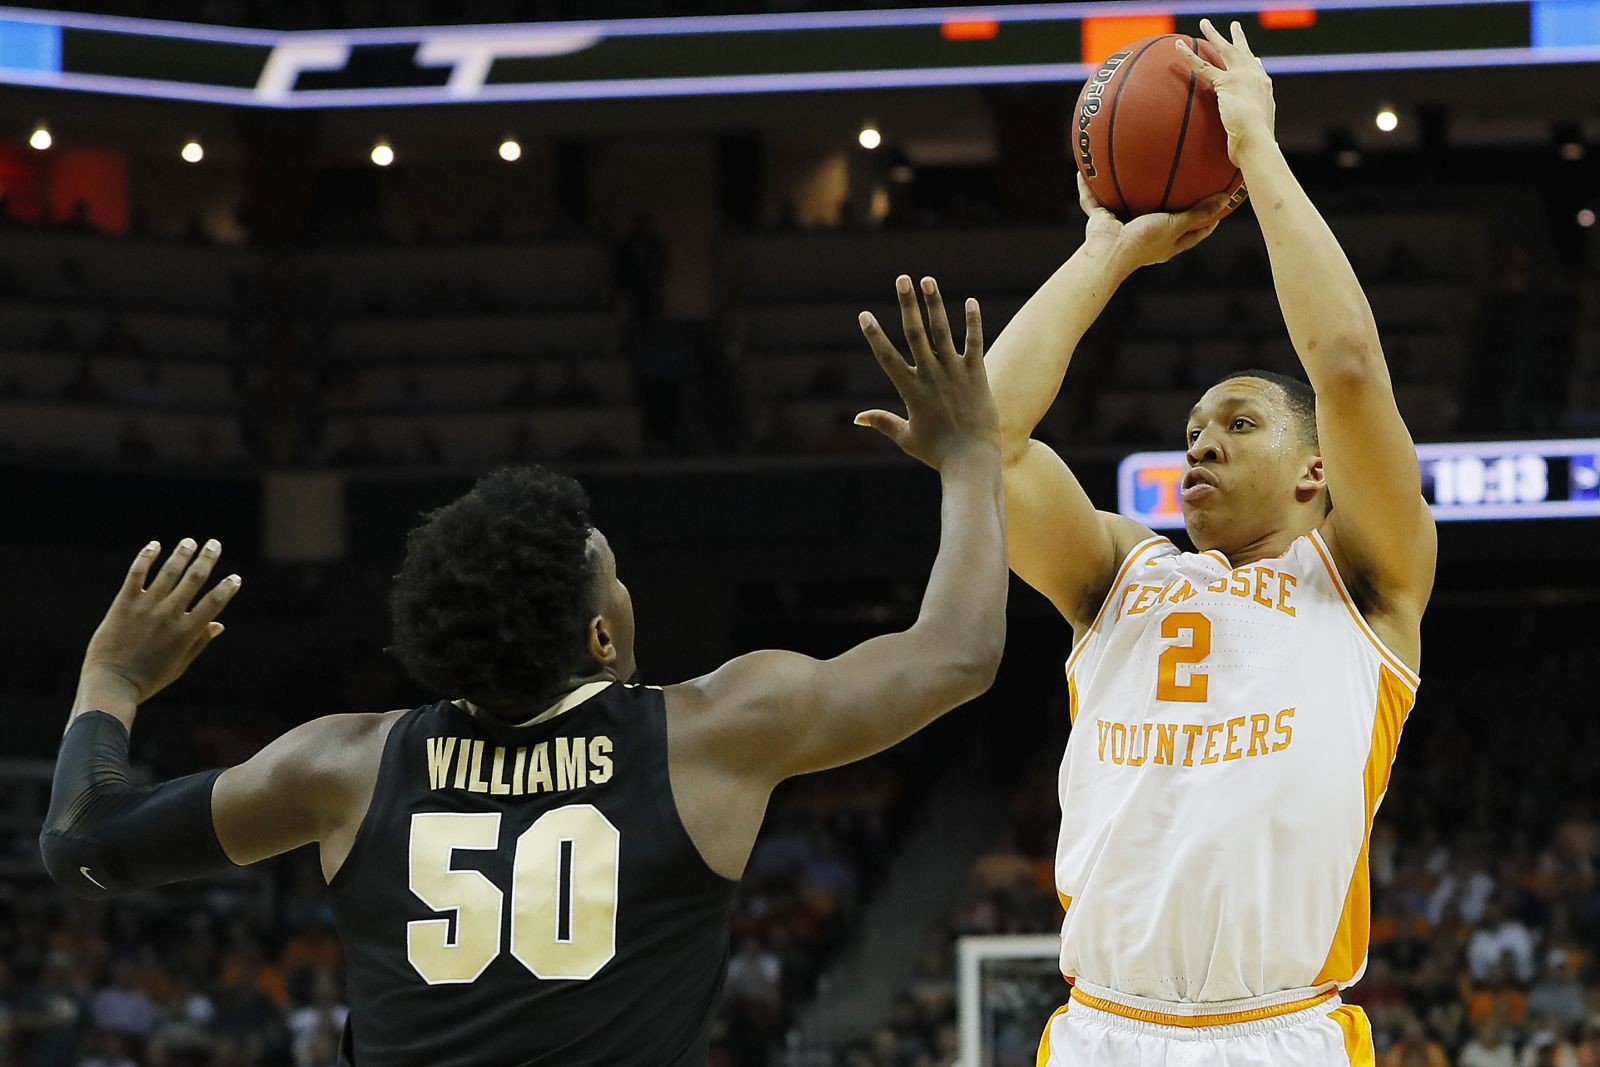 NBA Combine: Grant Williams played more relaxed in Game 2